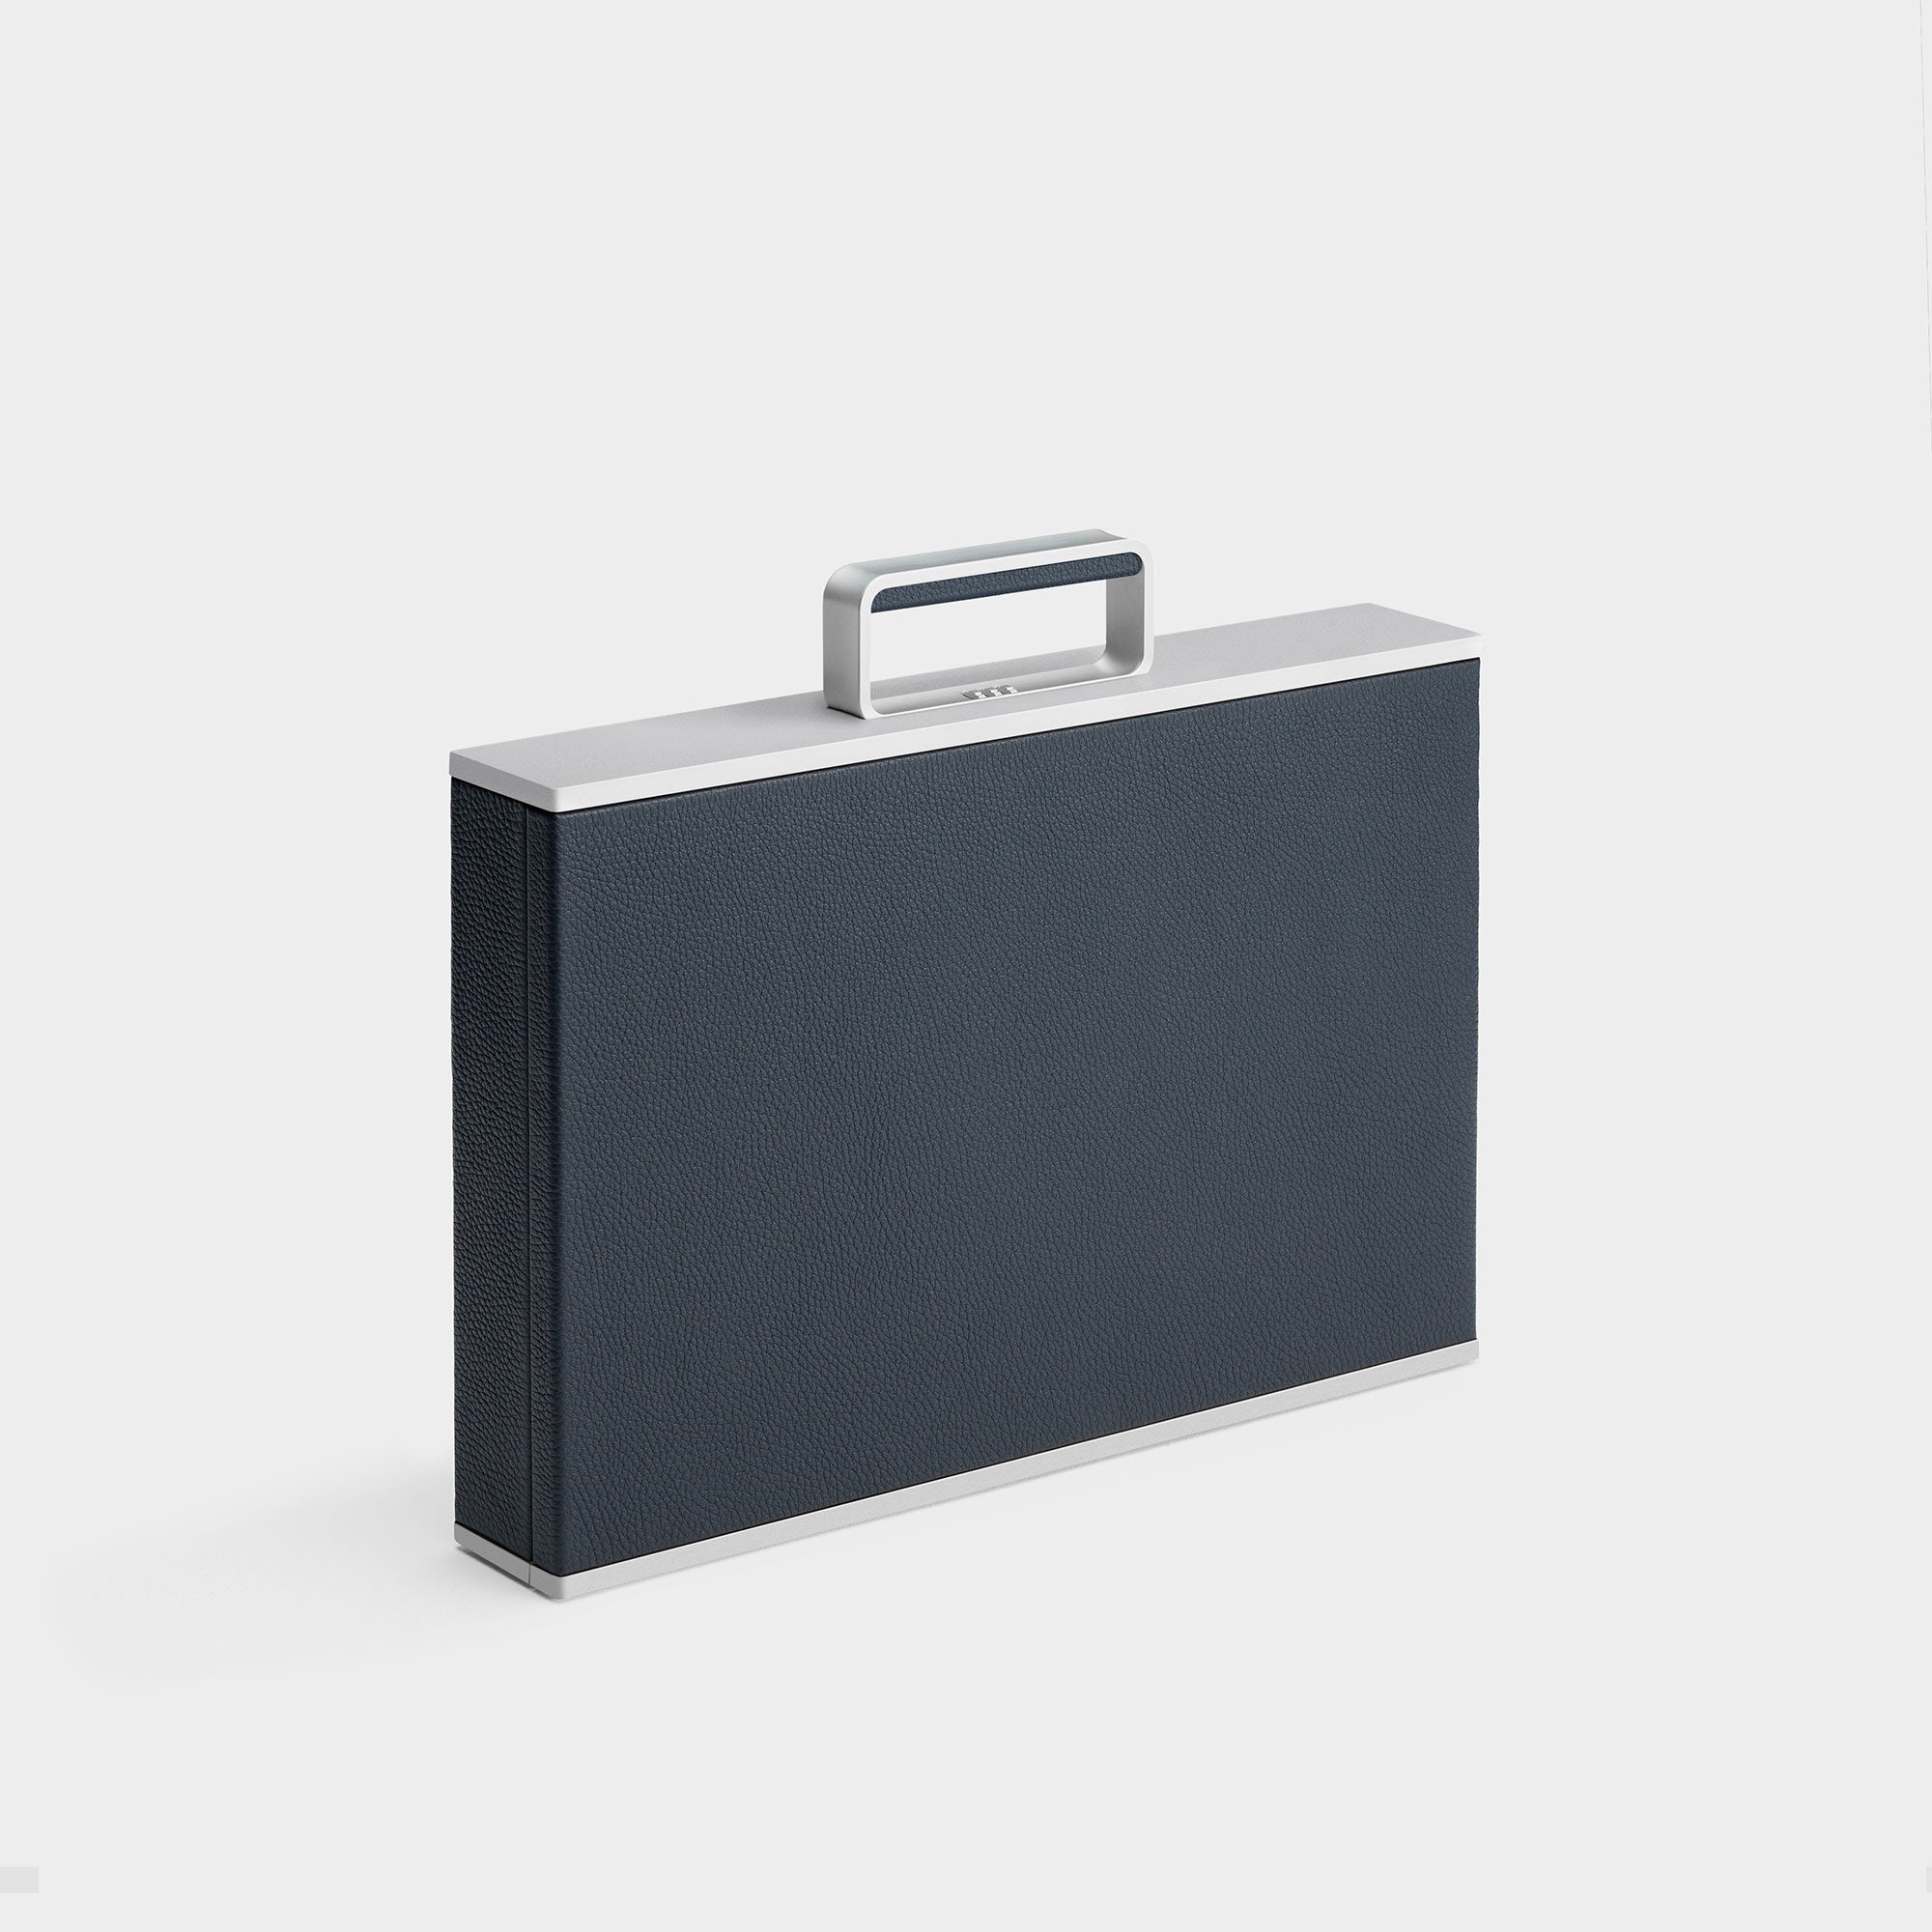 Product photo showing diagonal view of Mackenzie watch briefcase in marine leather, Alcantara interior and carbon fiber and anodized aluminum frame for up to 10 watches